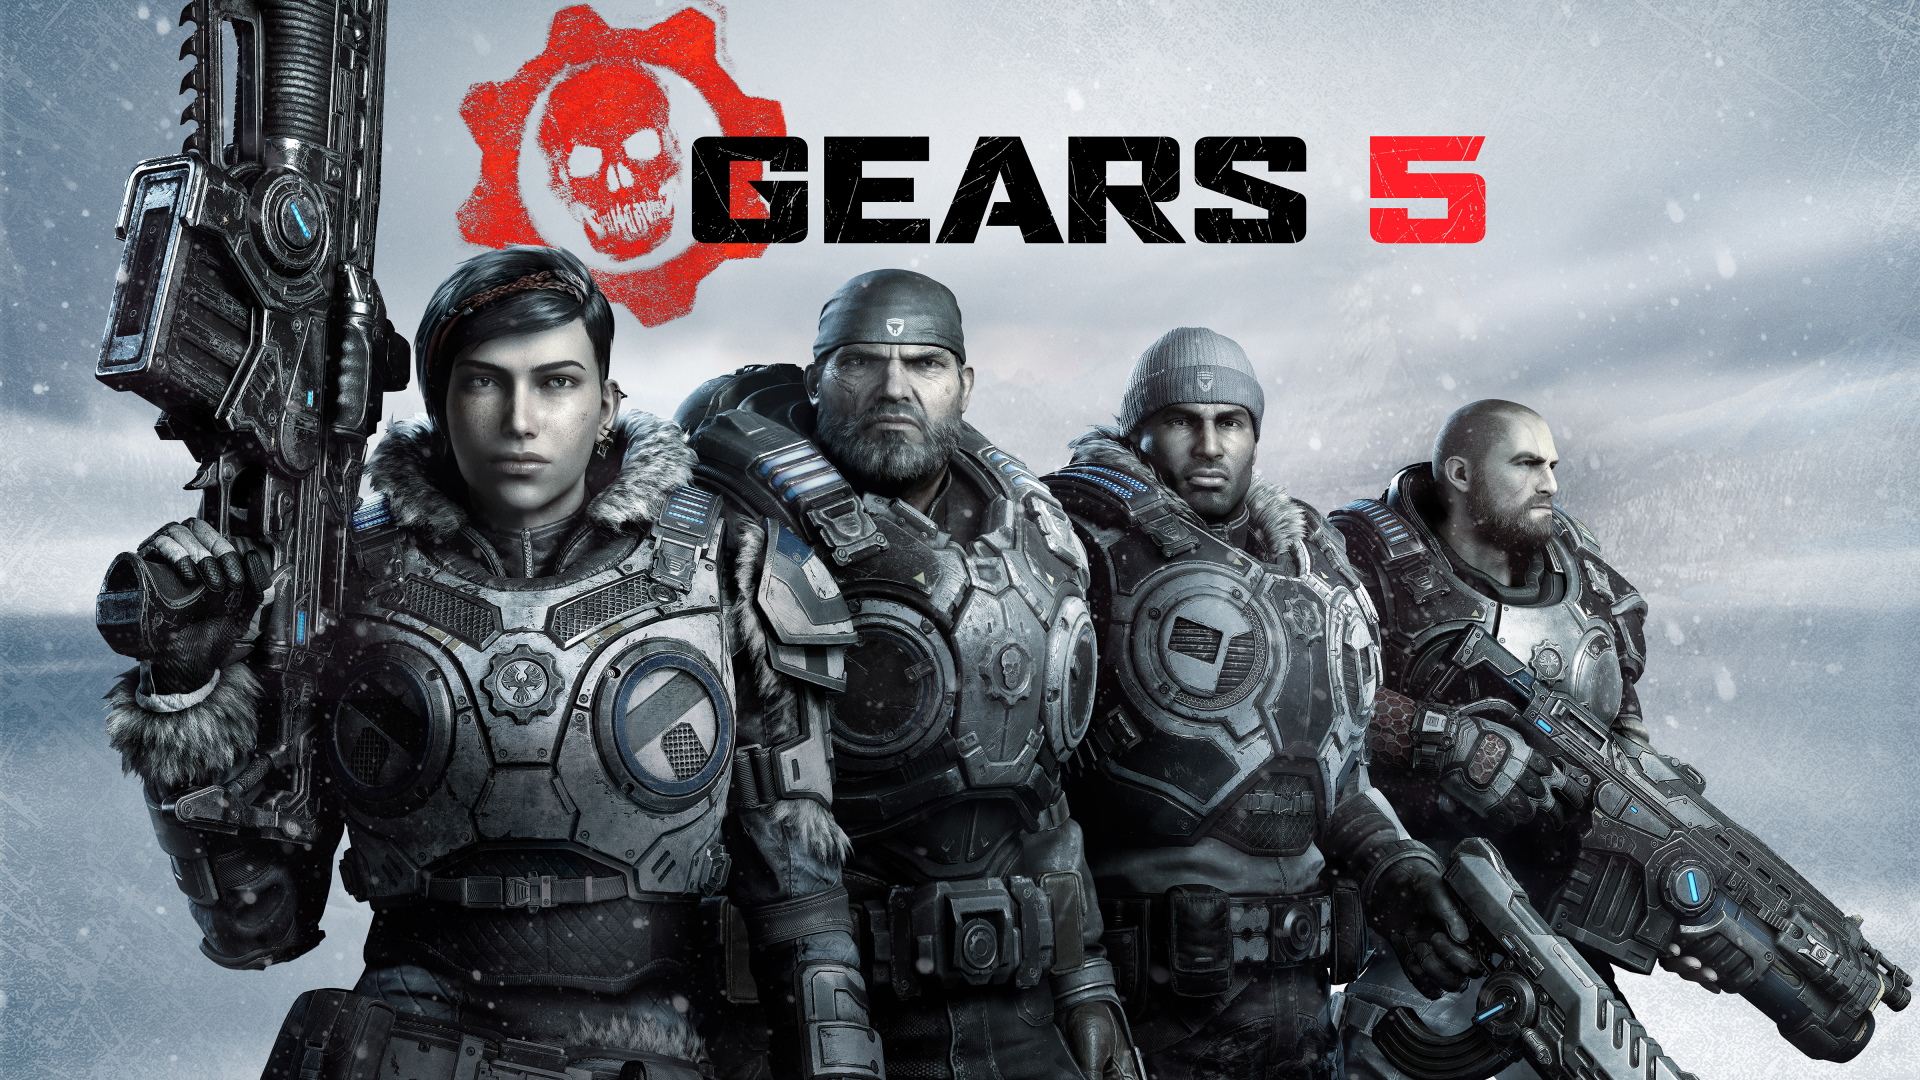 Gears of War 4 Game Review